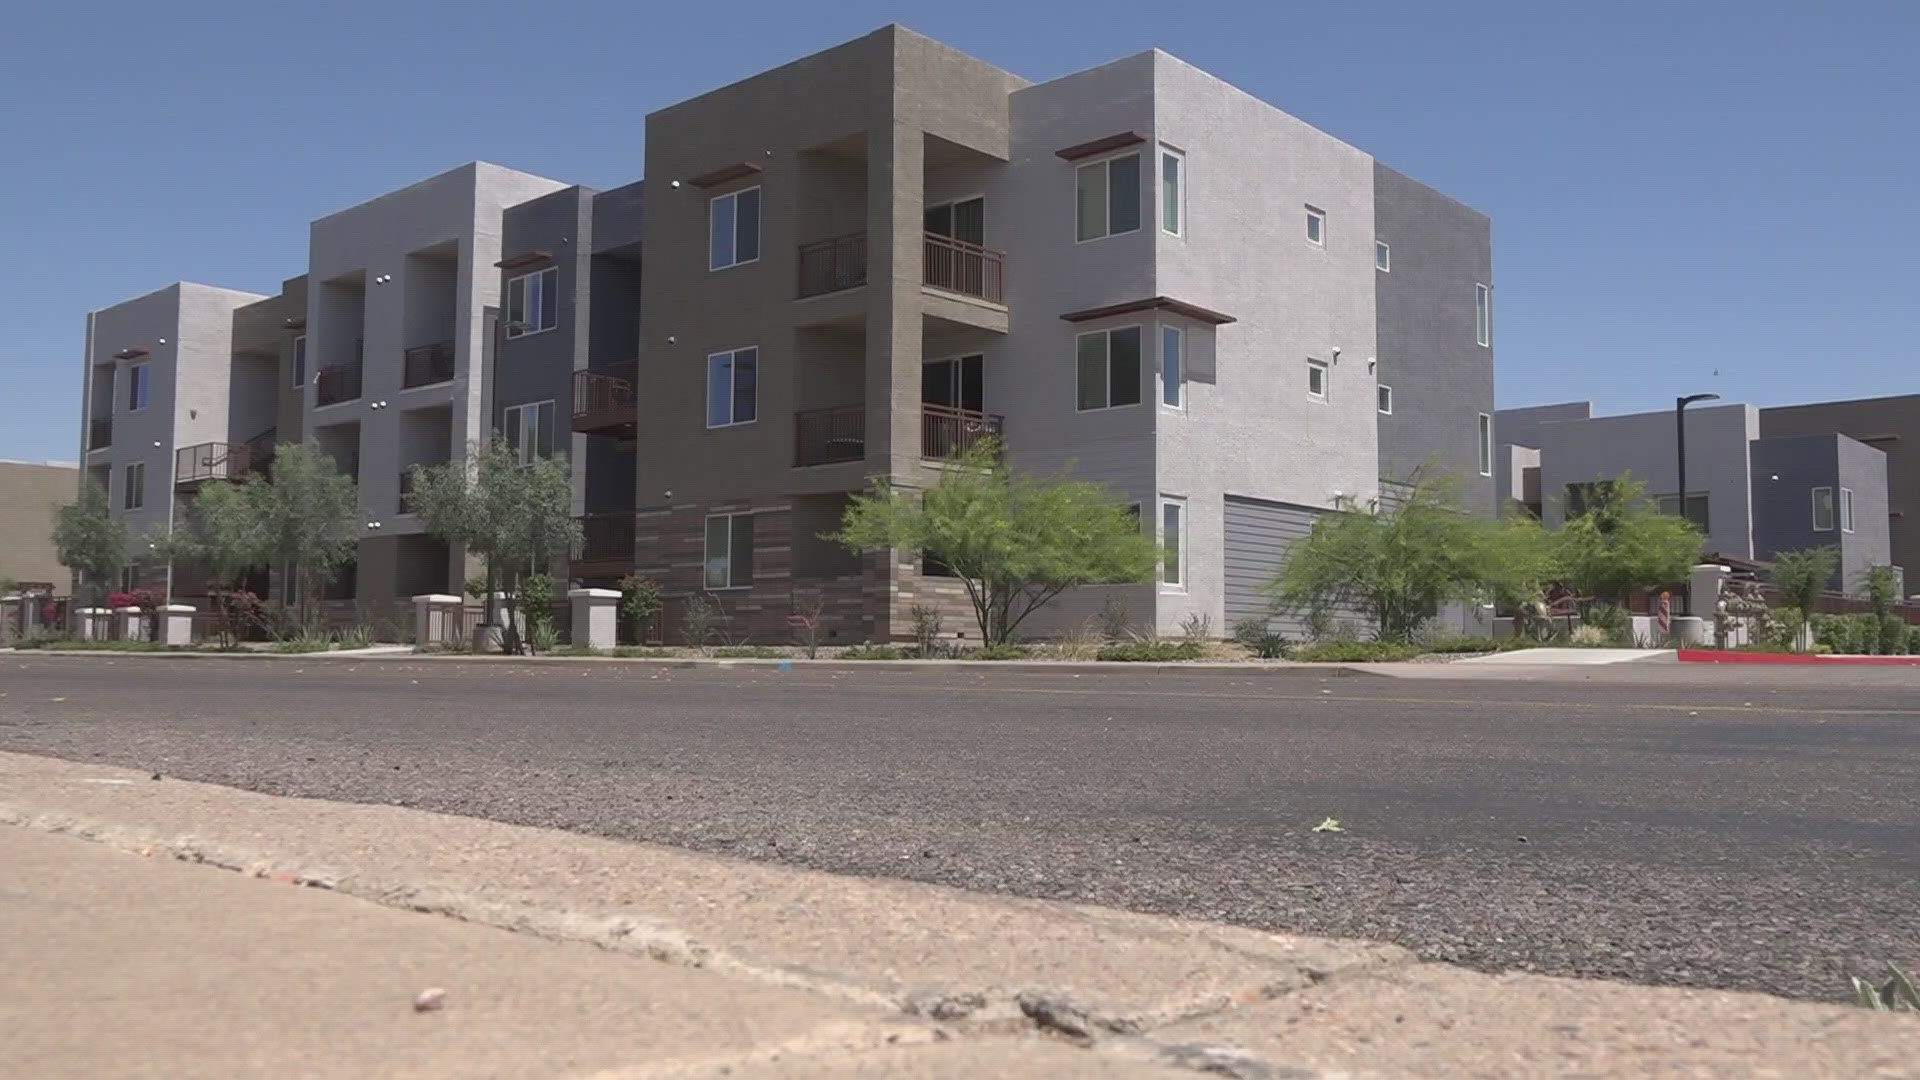 Latest analyses show rent is down slightly in the Valley, but a local expert says it's unclear yet if it will continue to drop.